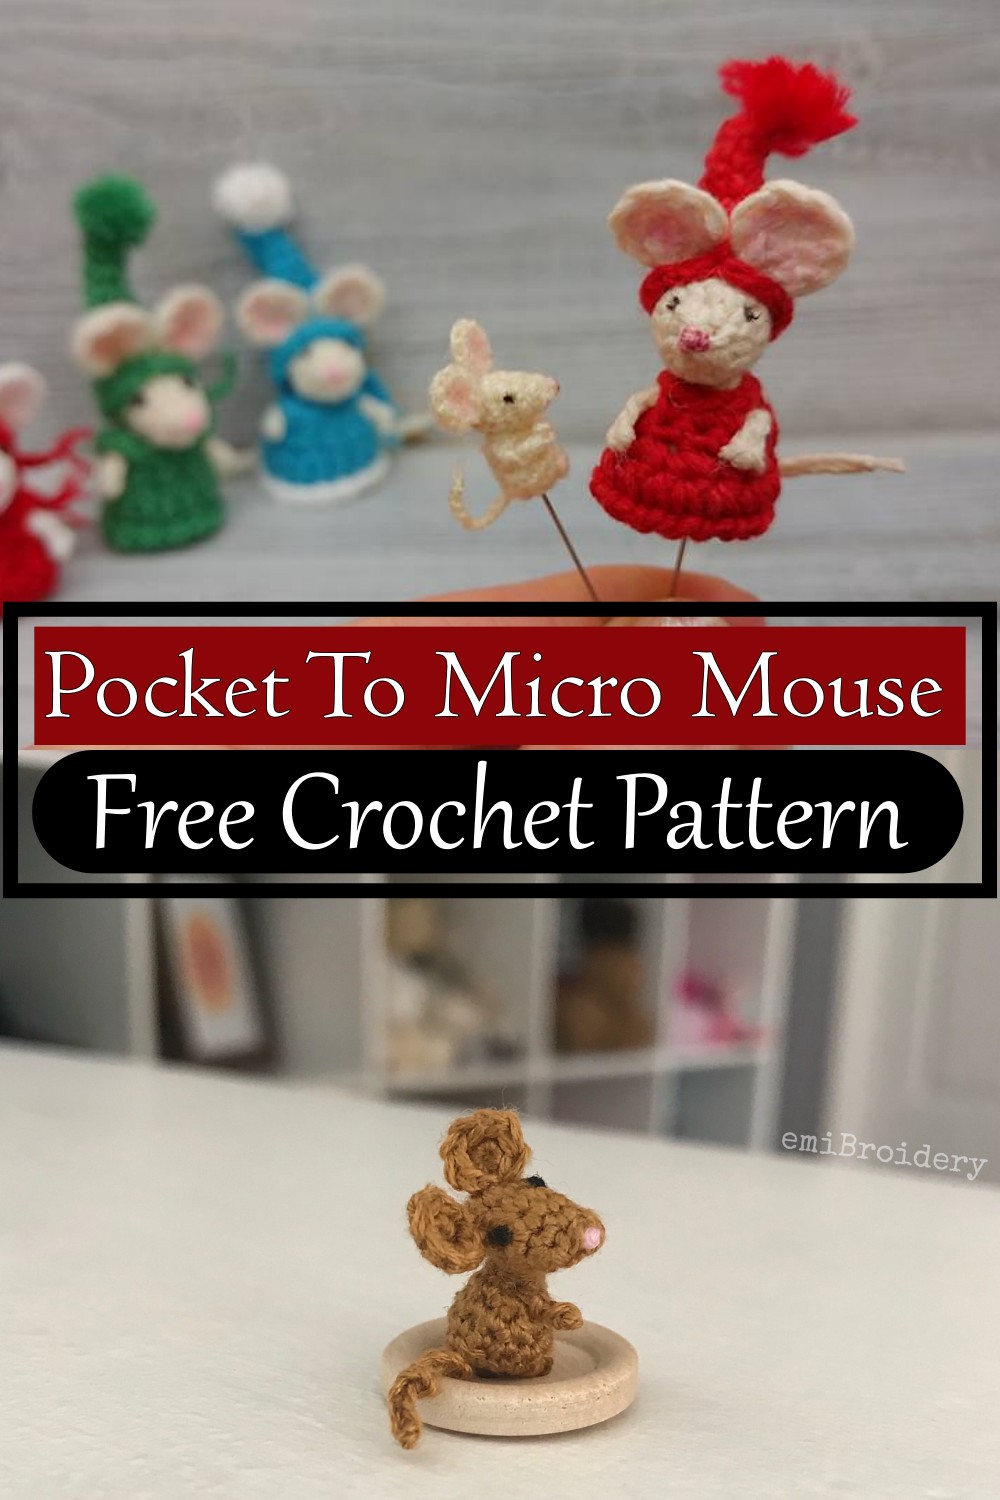 Pocket To Micro Mouse